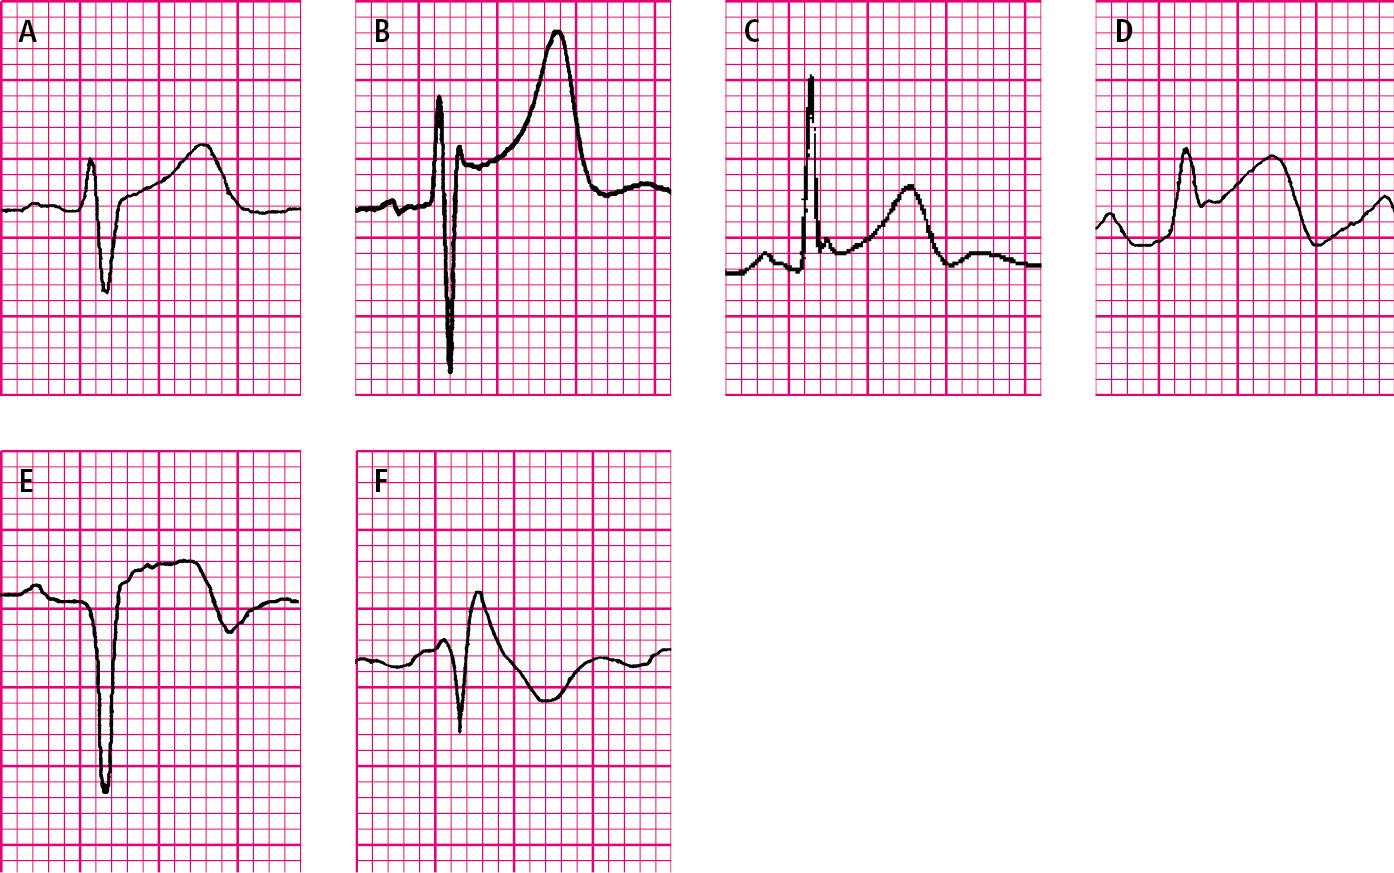 Figure 031_1432.  ST-segment elevation.  A , physiologic, upsloping ST-segment elevation.  B , J-point elevation with concave ST-segment elevation in early ventricular repolarization syndrome.  C , early ventricular repolarization syndrome with a notched terminal R–wave phase.  D , ST-segment elevation during an episode of Prinzmetal angina.  E , ST-segment elevation in acute myocardial infarction (Pardee wave).  F , downsloping (coved) ST-segment elevation in Brugada syndrome. 